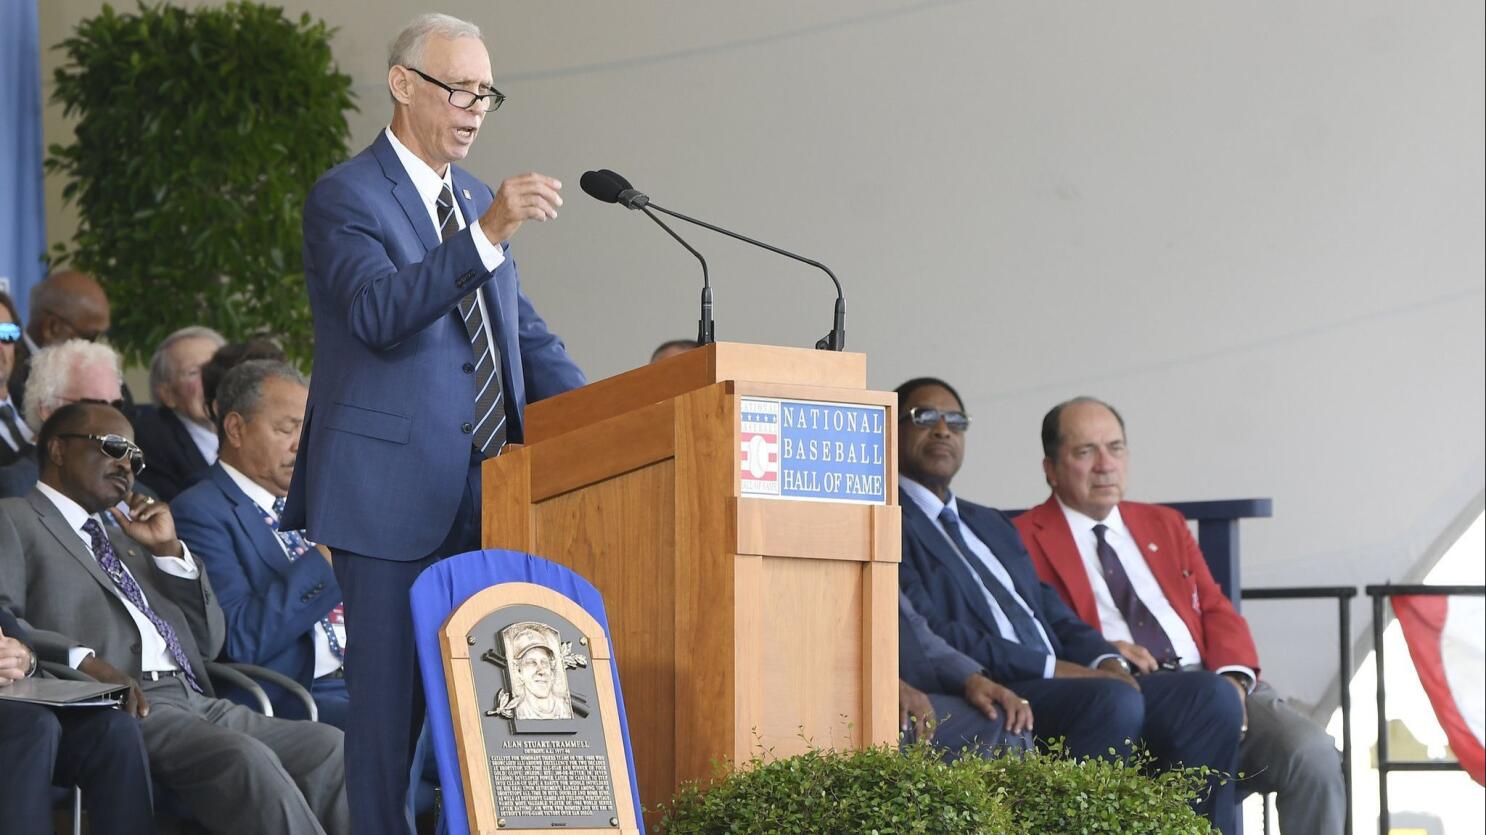 2018 Baseball Hall of Fame induction ceremony for Alan Trammell